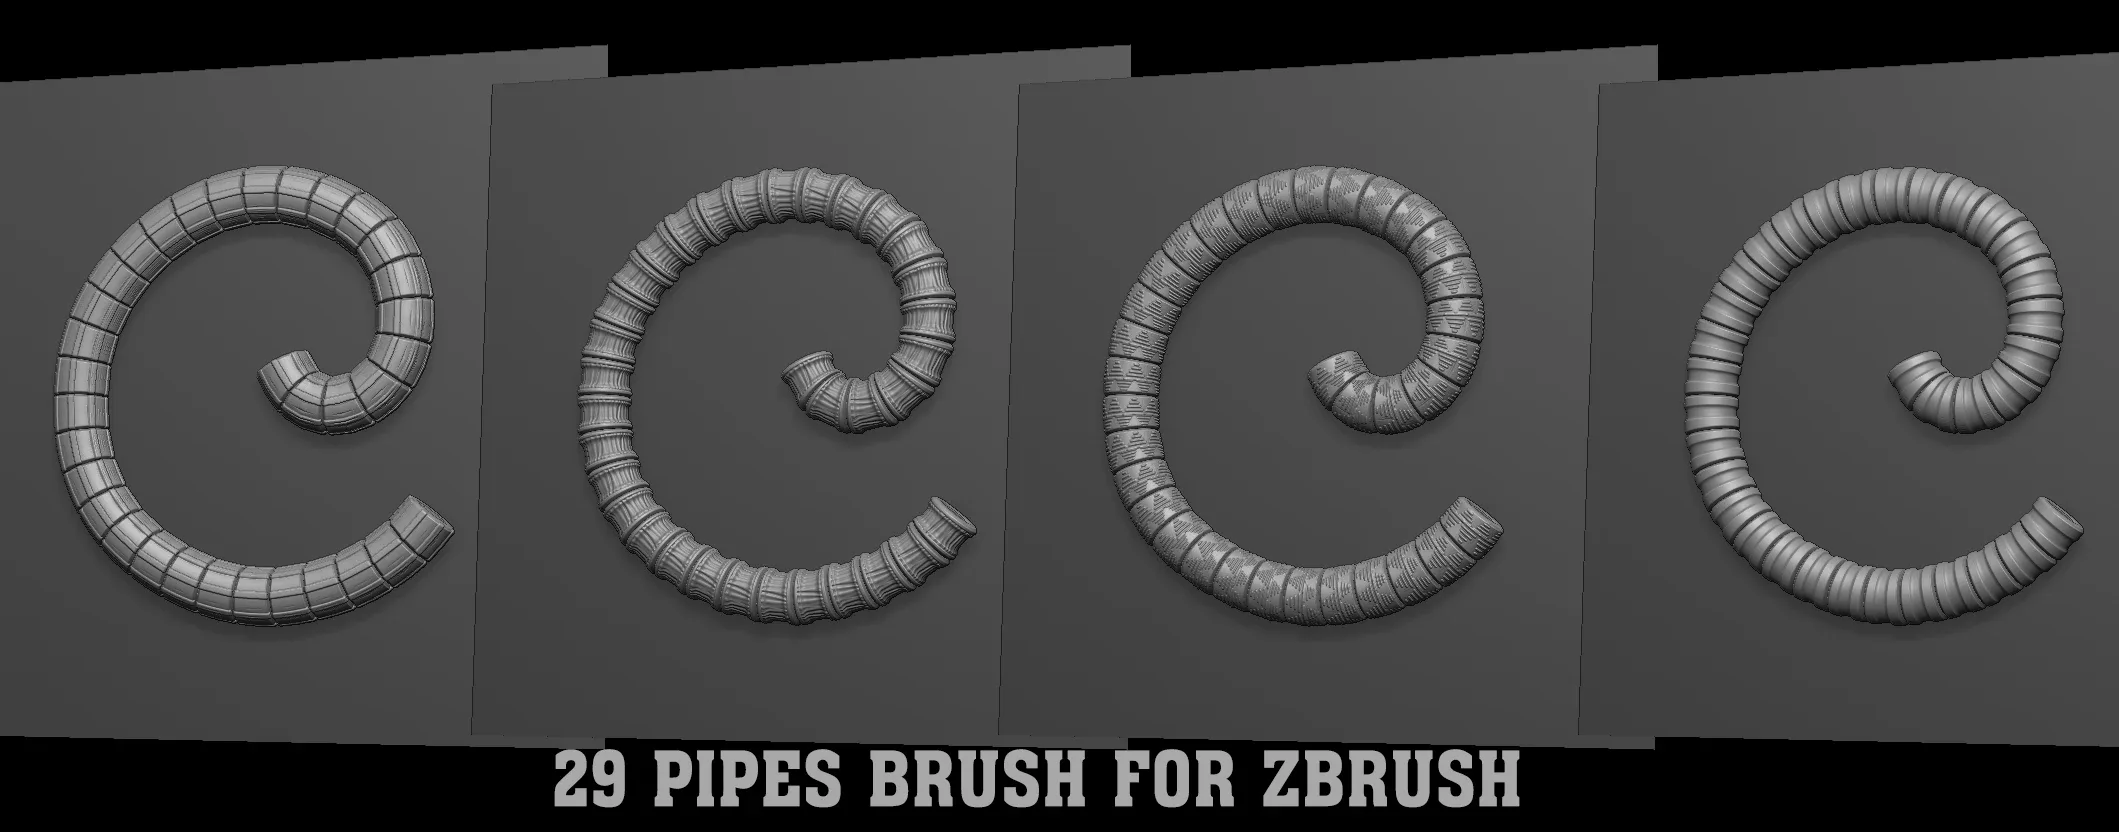 29 Pipes Brush for Zbrush